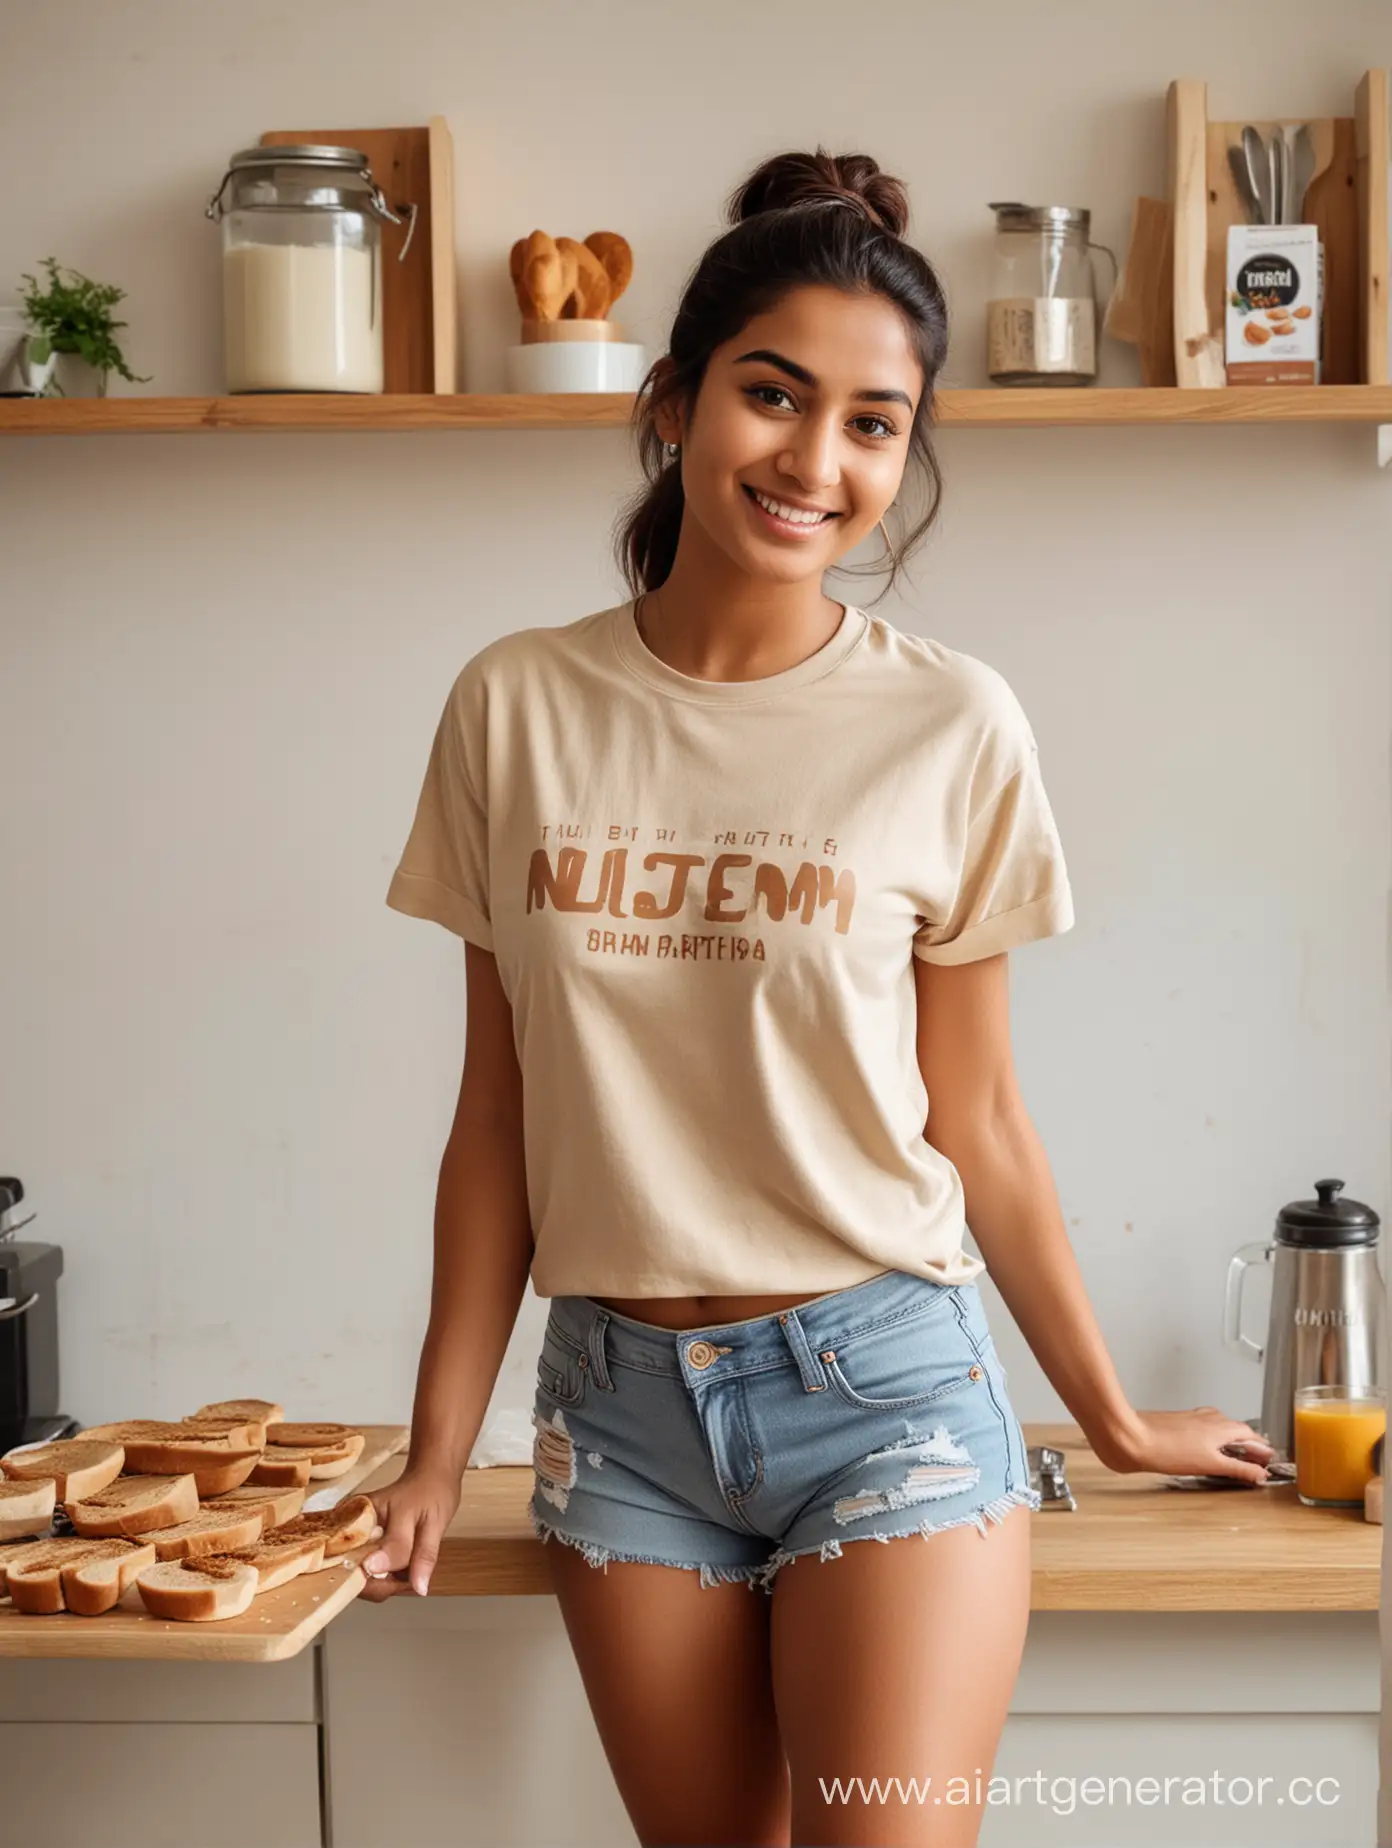 25-year-old North Indian Girl, Influencer, wearing tshirt and shorts, having bun, no-earrings, standing behind the table top in the kitchen, holding a half spreaded bread with peanut butter,  looking at the camera